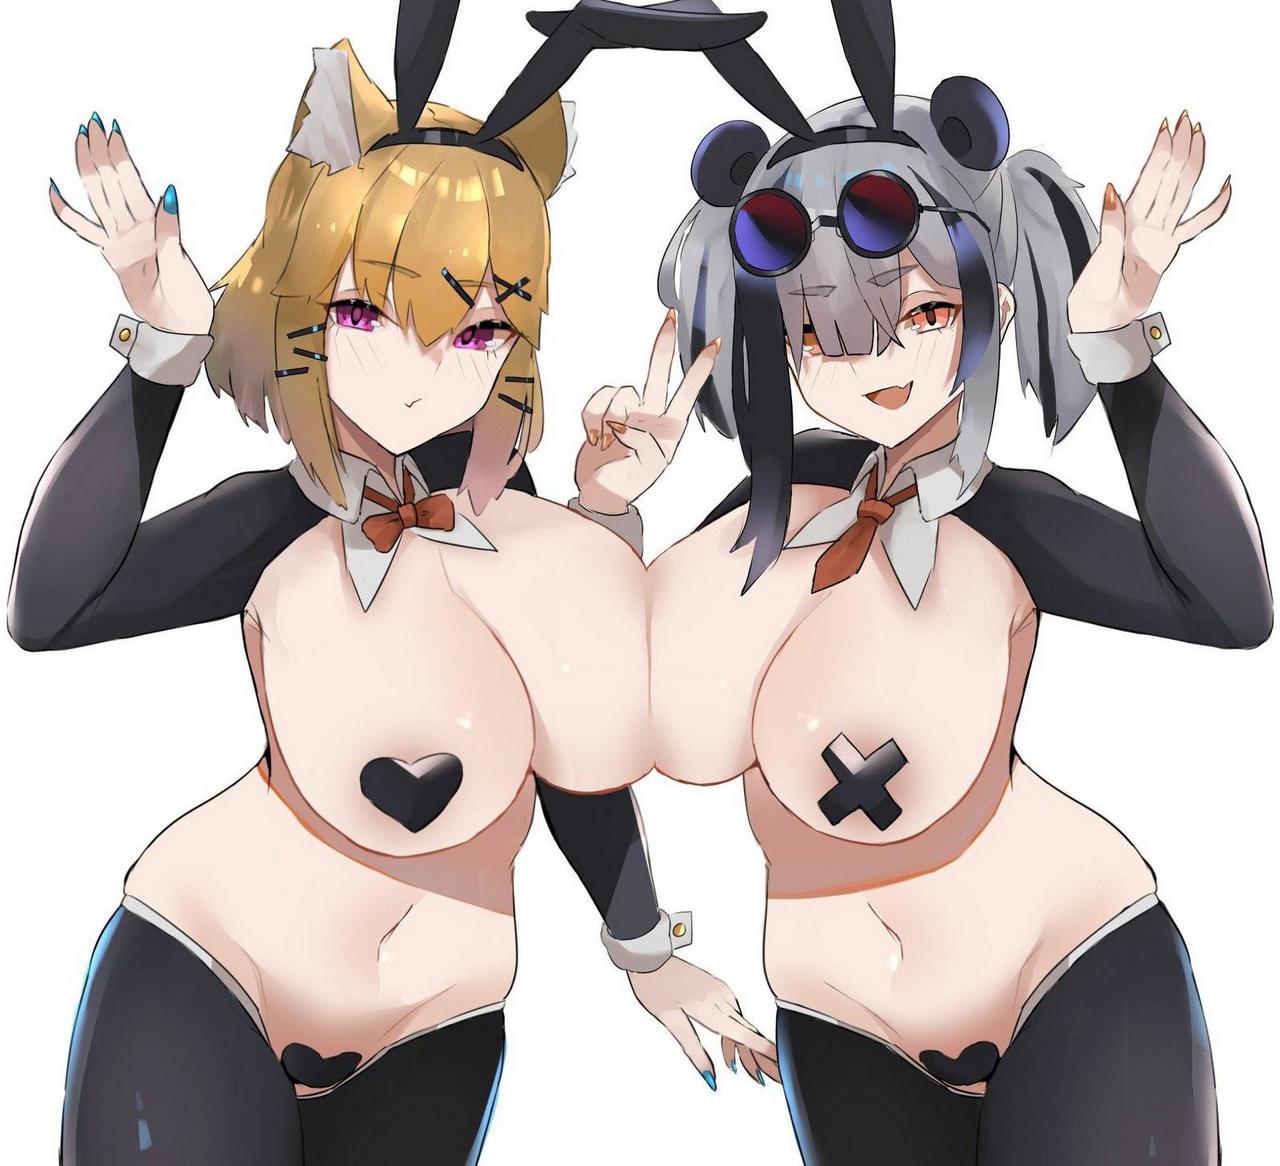 Lewd Bunnies Utage And Feate